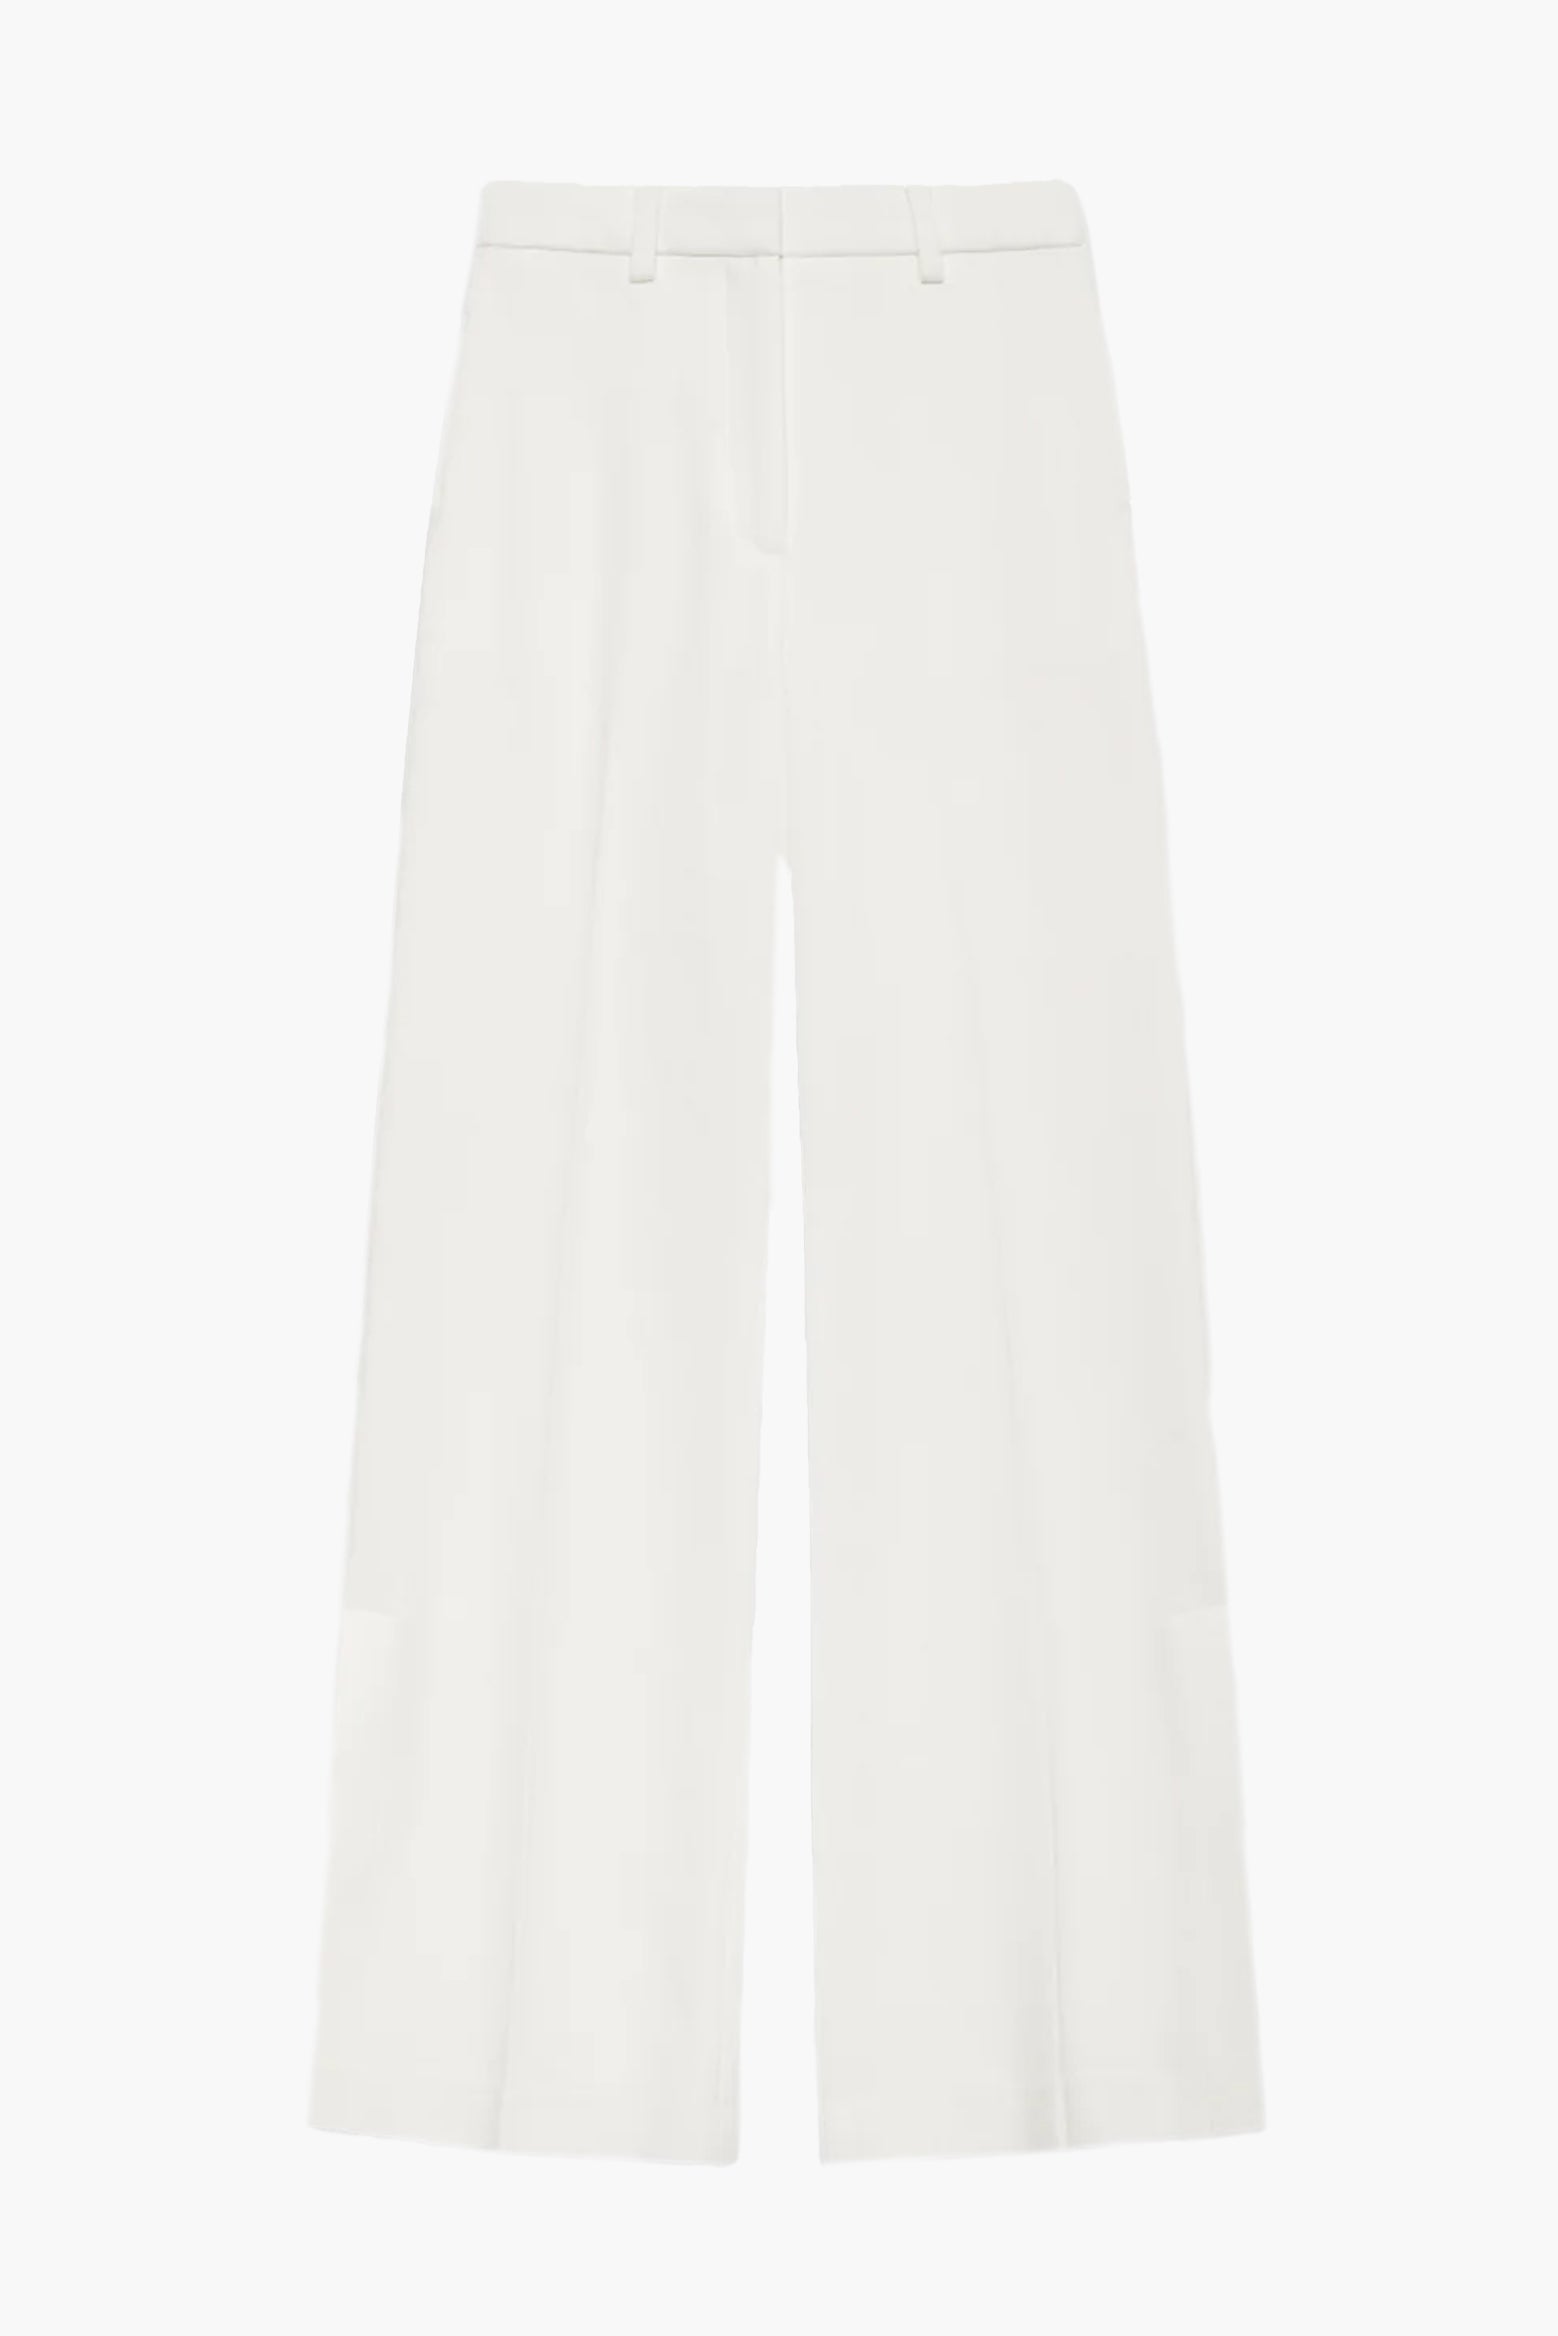 Anine Bing Lyra Pant in Ivory available at The New Trend Australia.